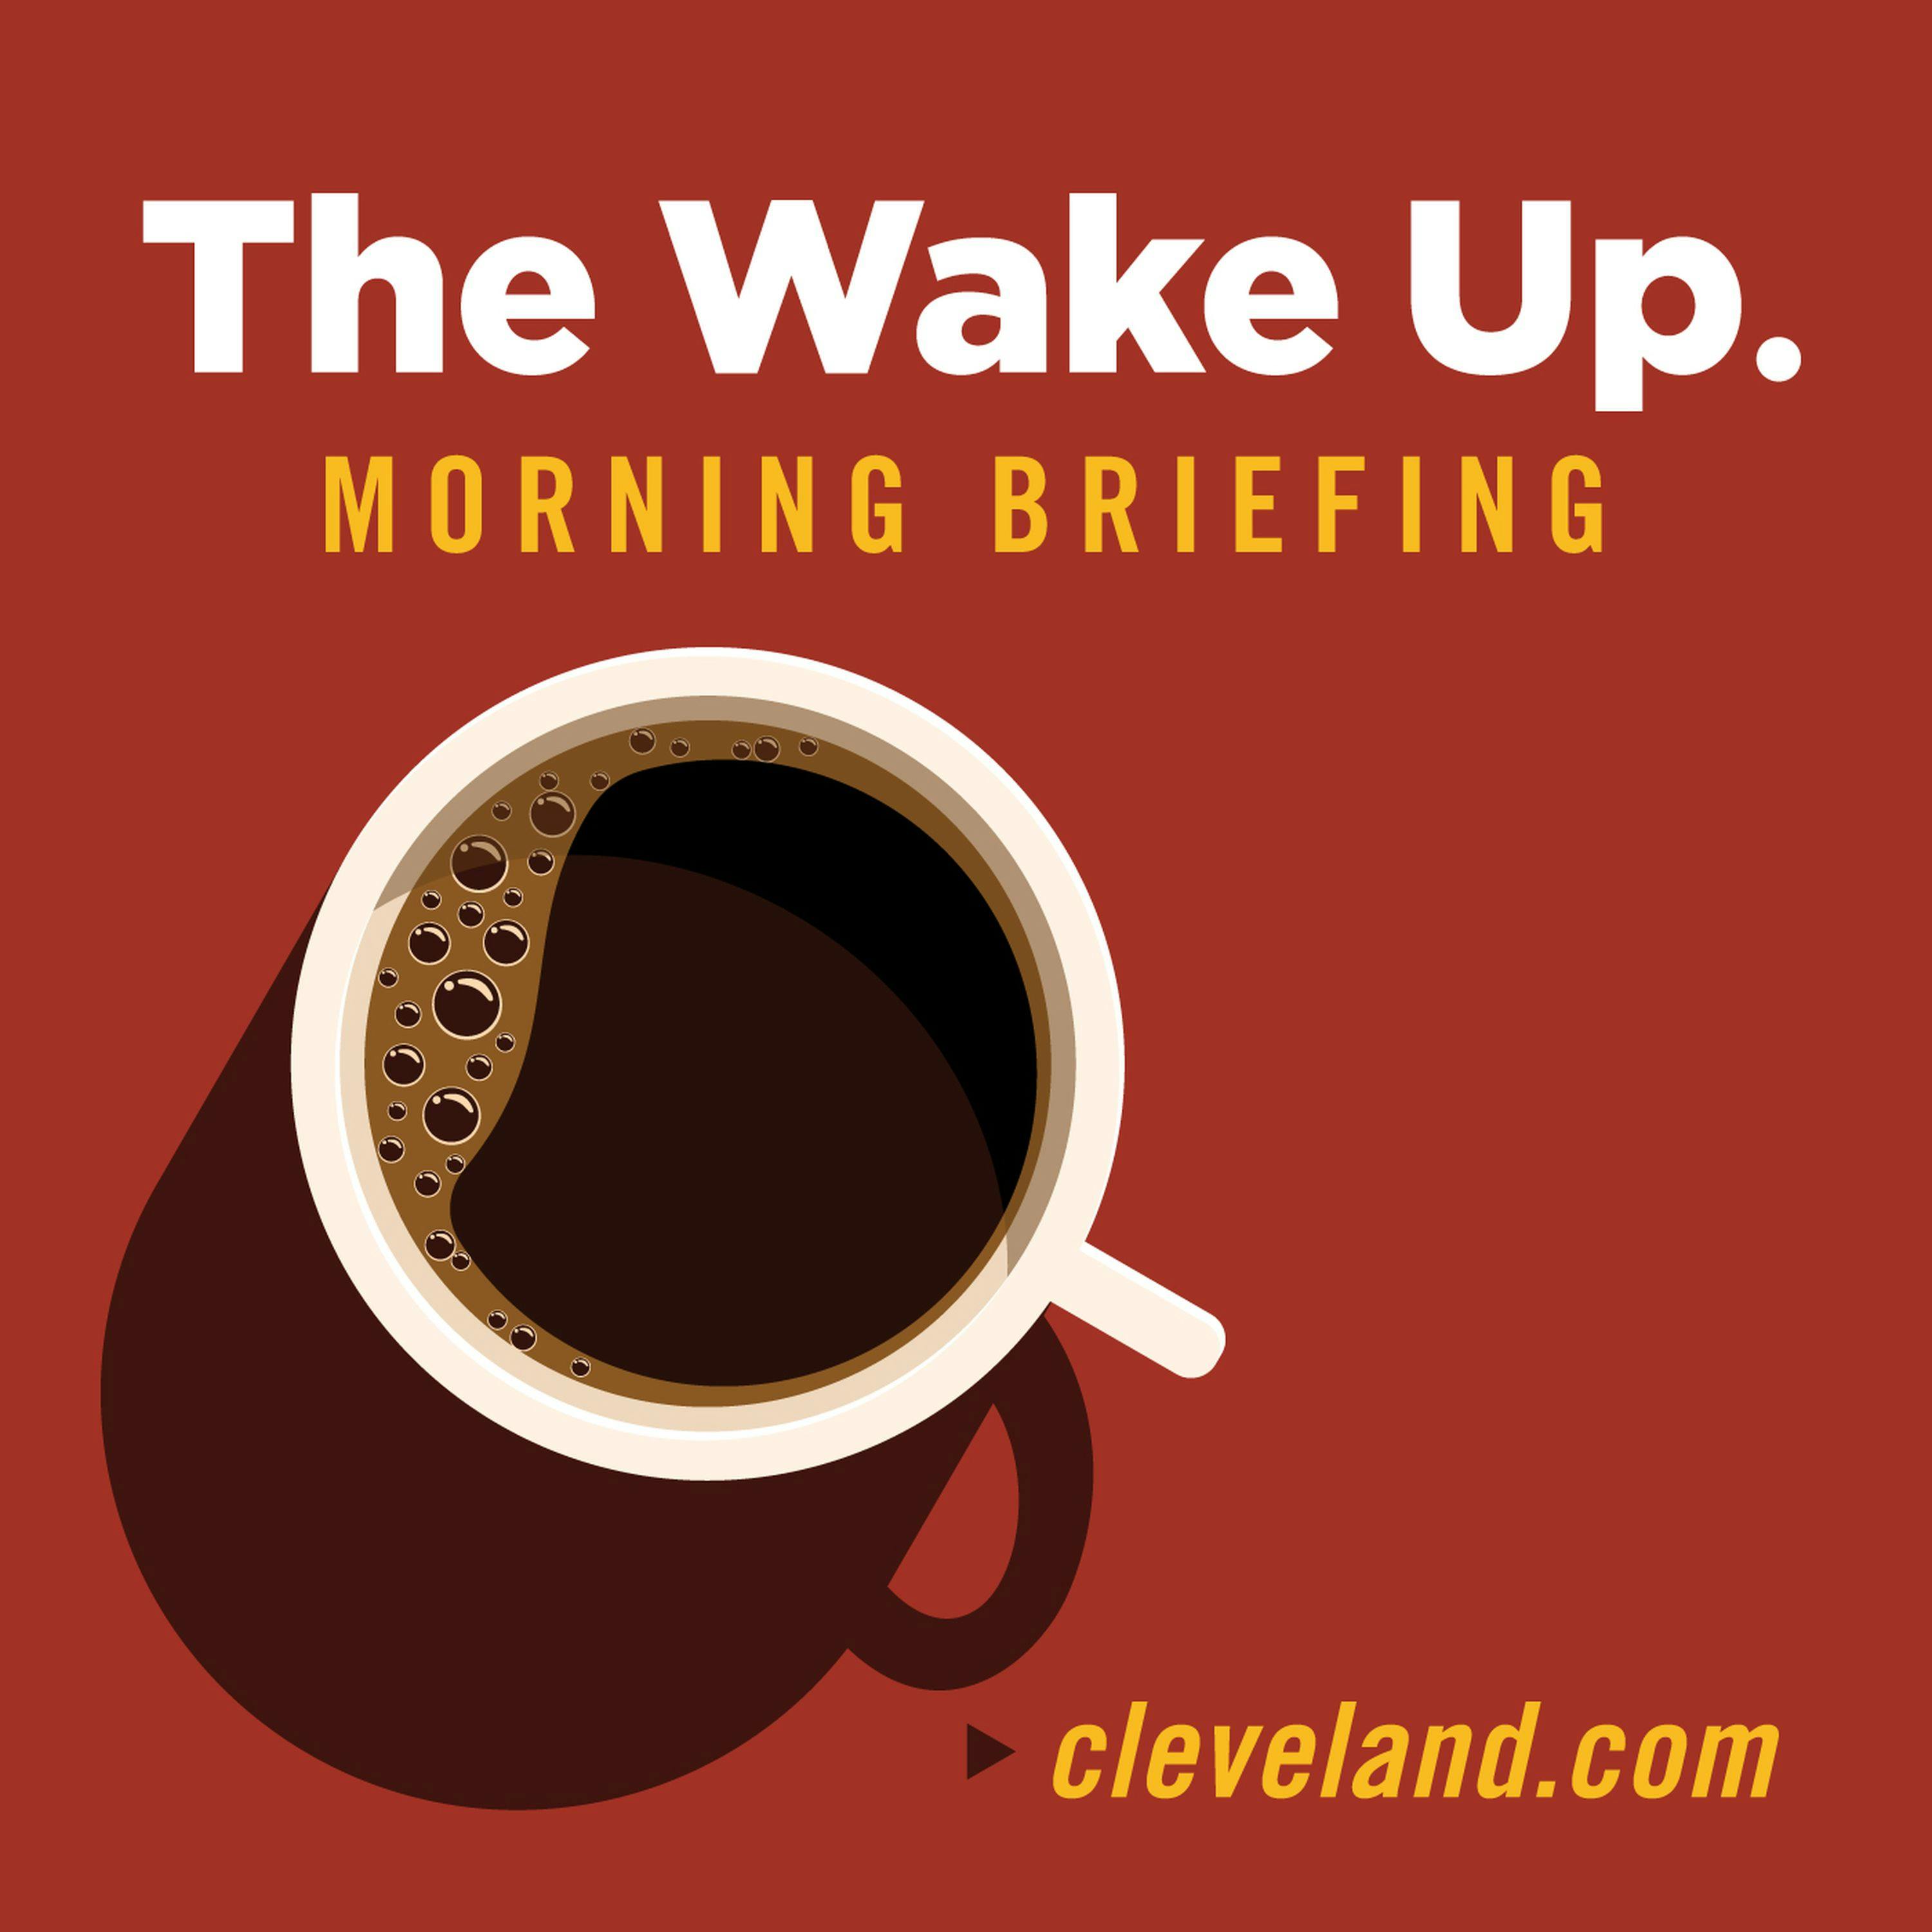 The Wake Up - Tuesday, Oct. 22, 2019